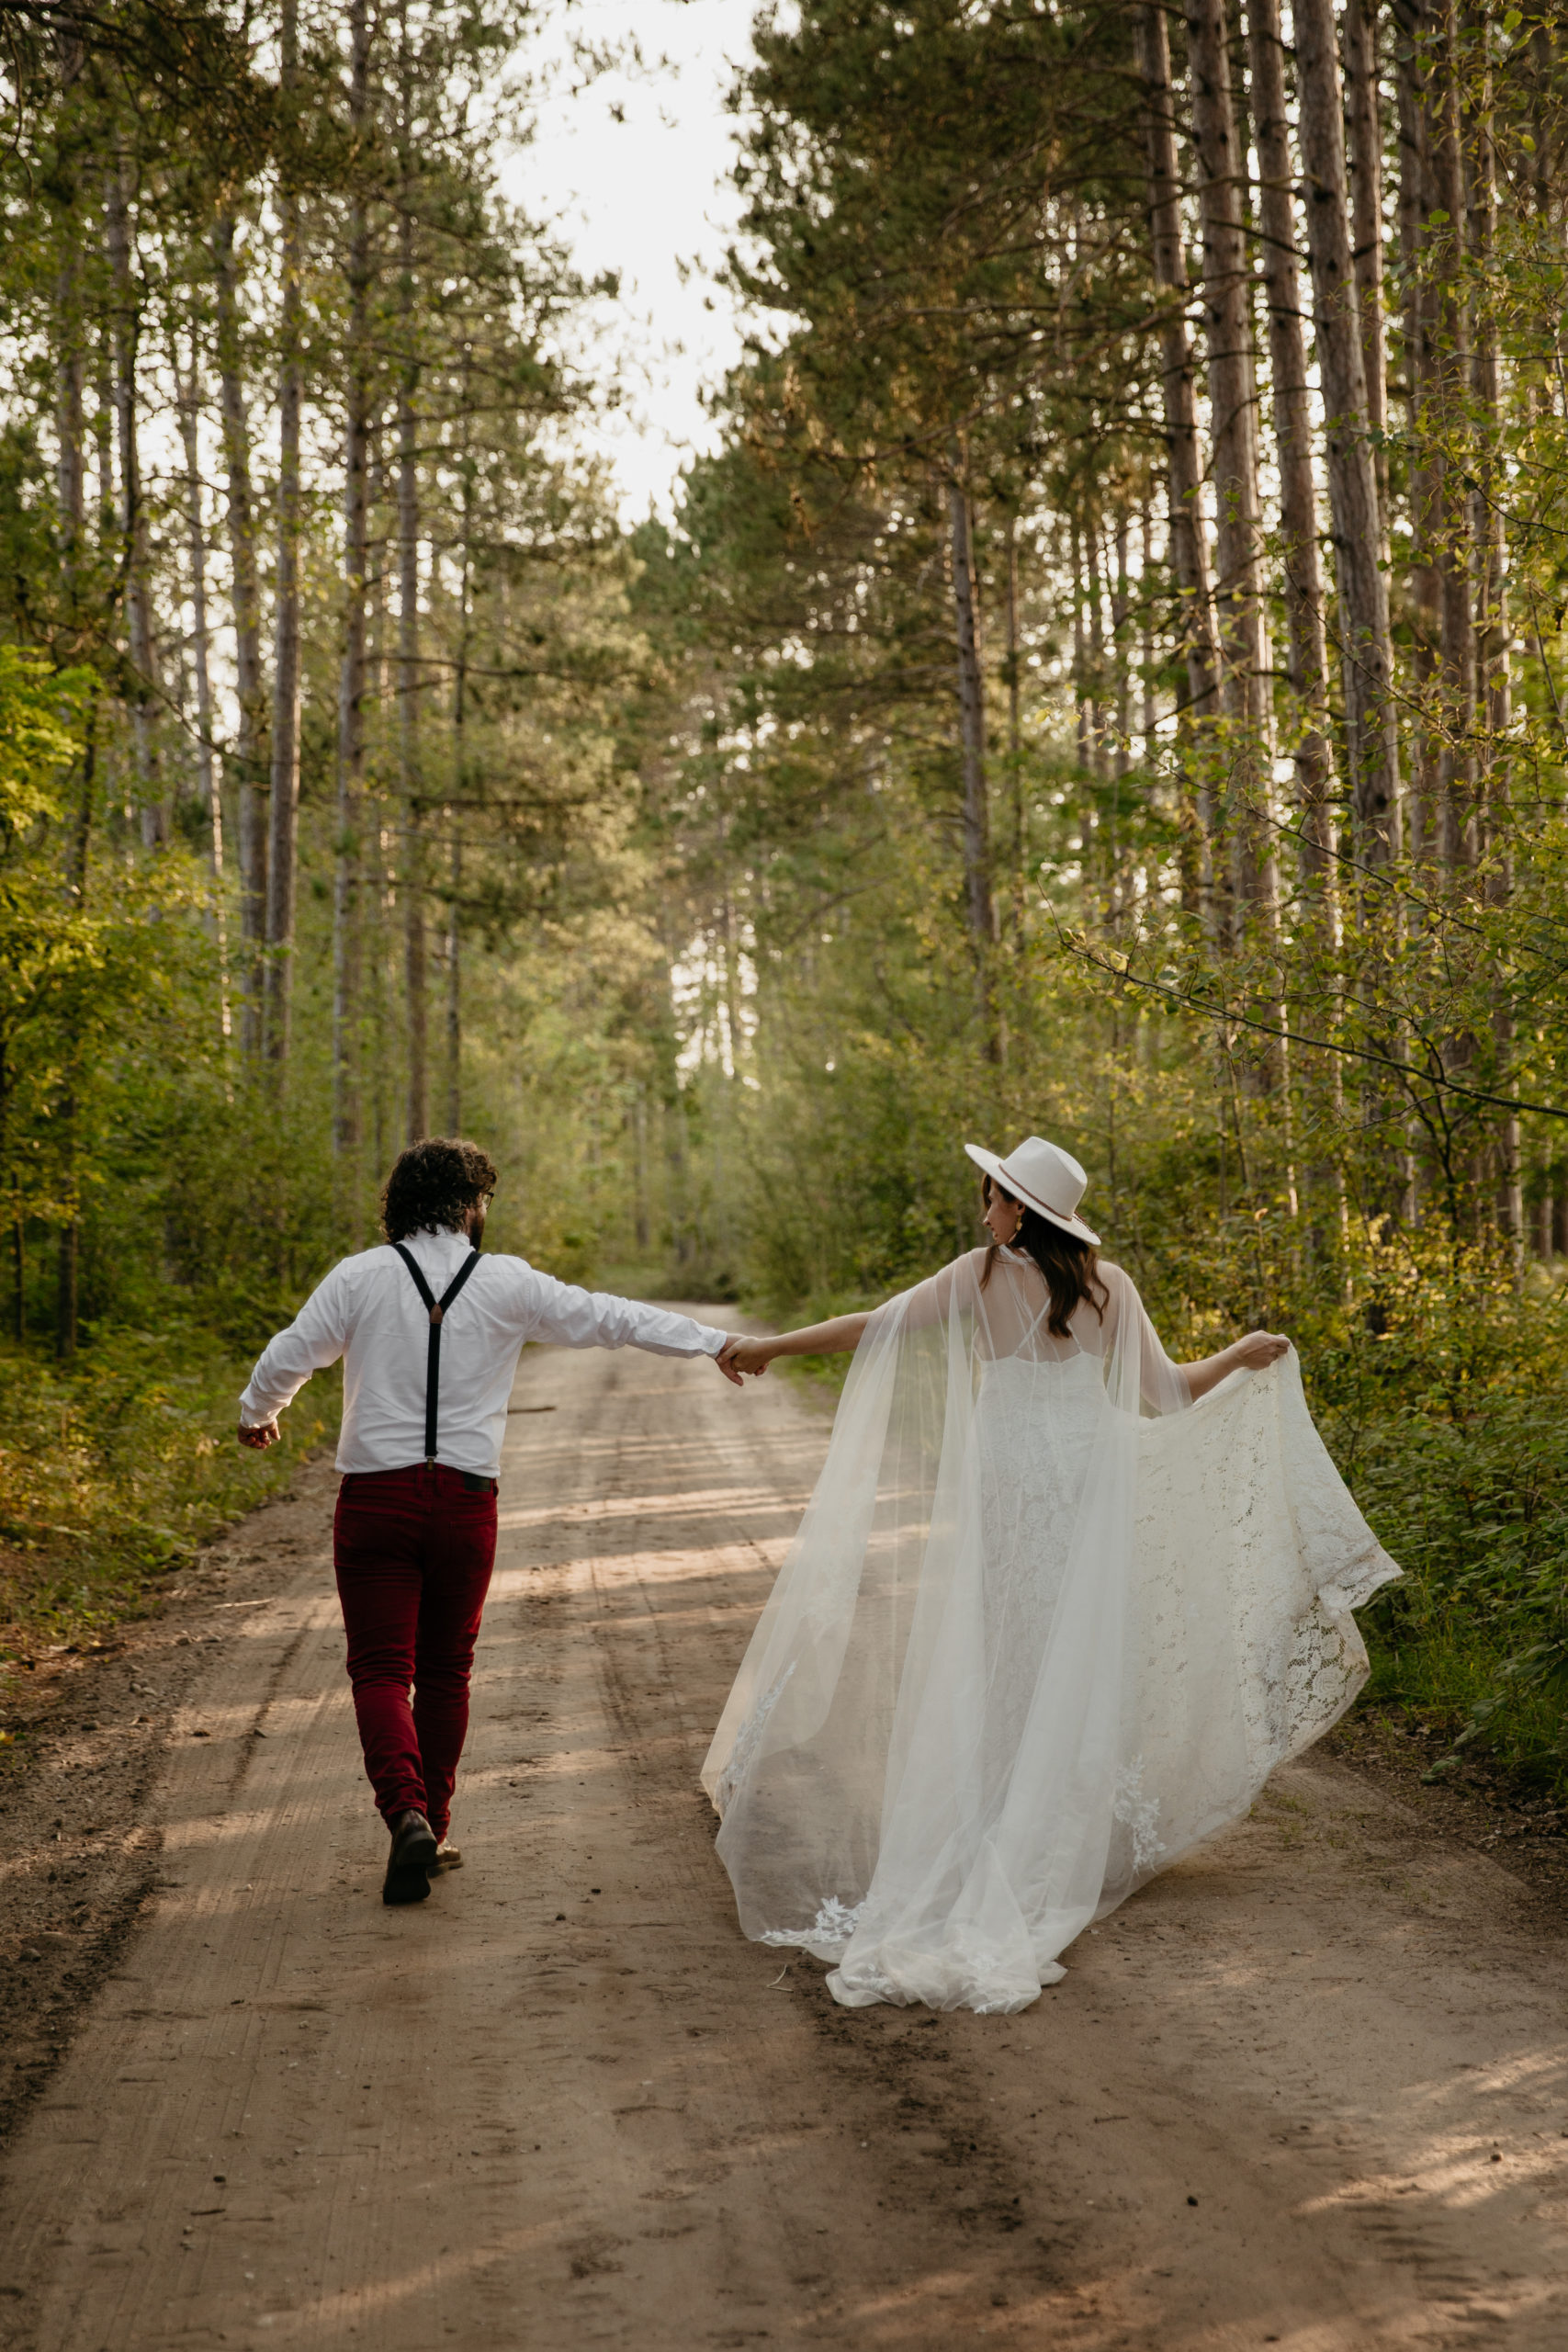 This Manistee Forest elopement in Michigan is purely magical